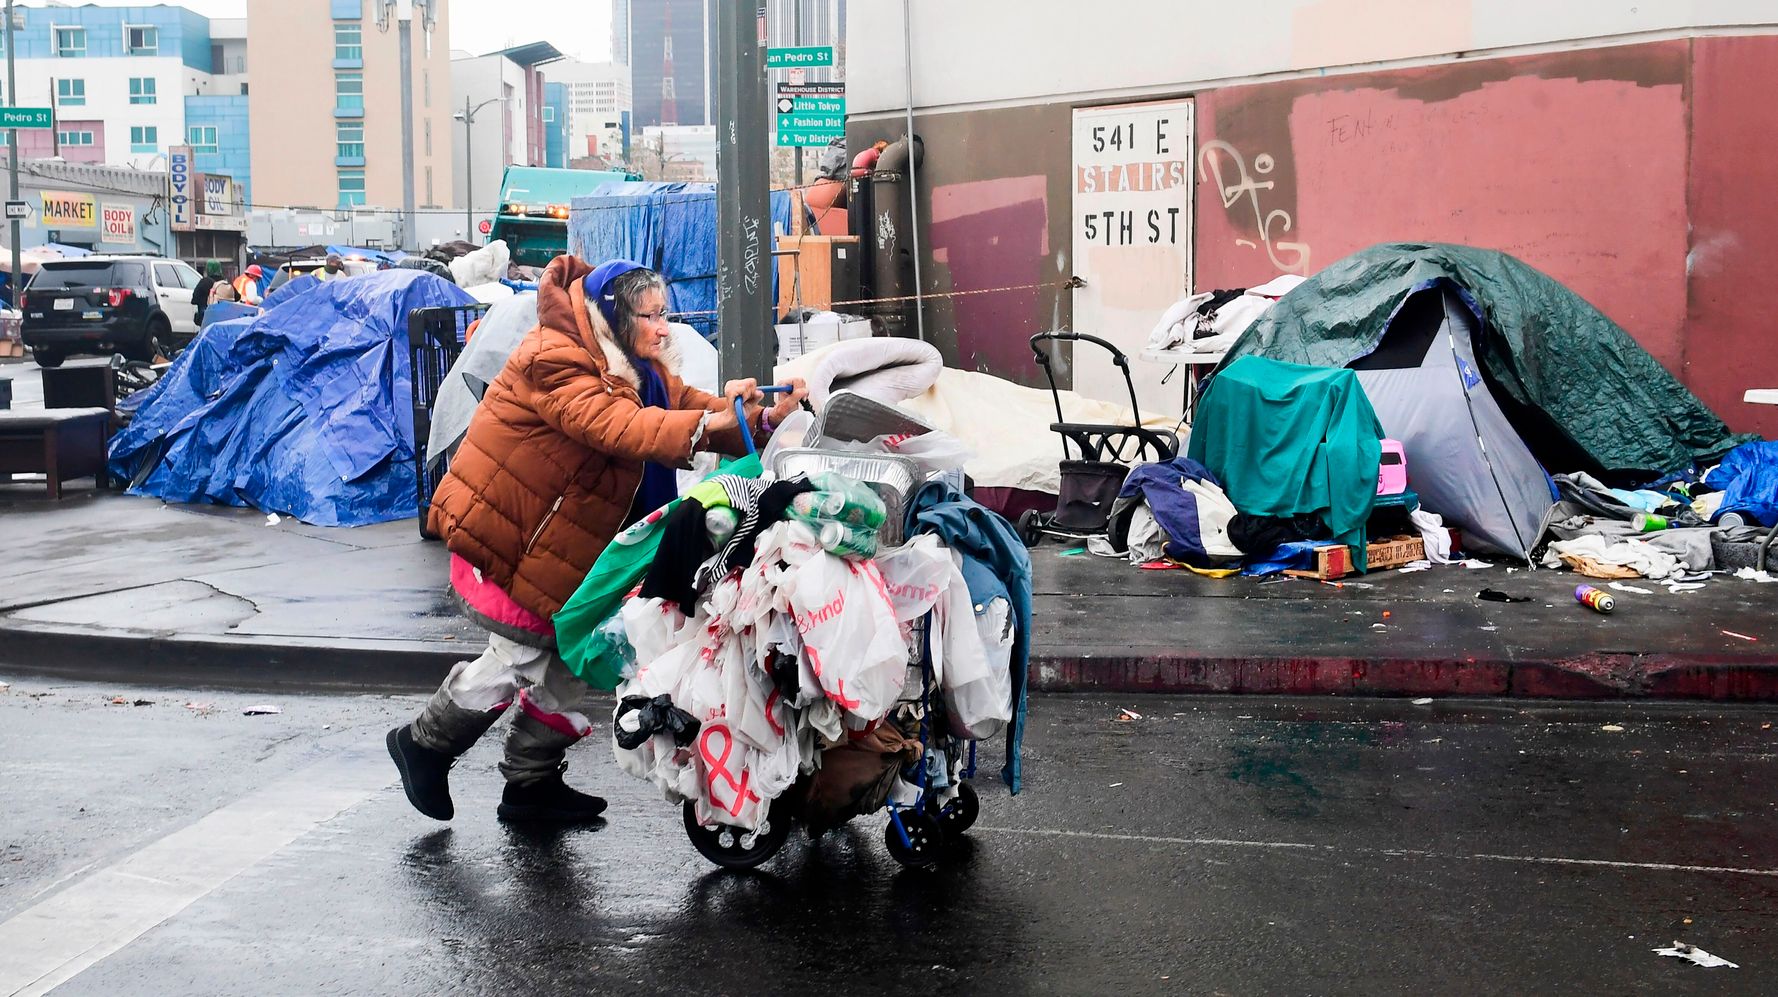 Judge Orders Los Angeles To Provide Housing To Skid Row's Entire Homeless Population